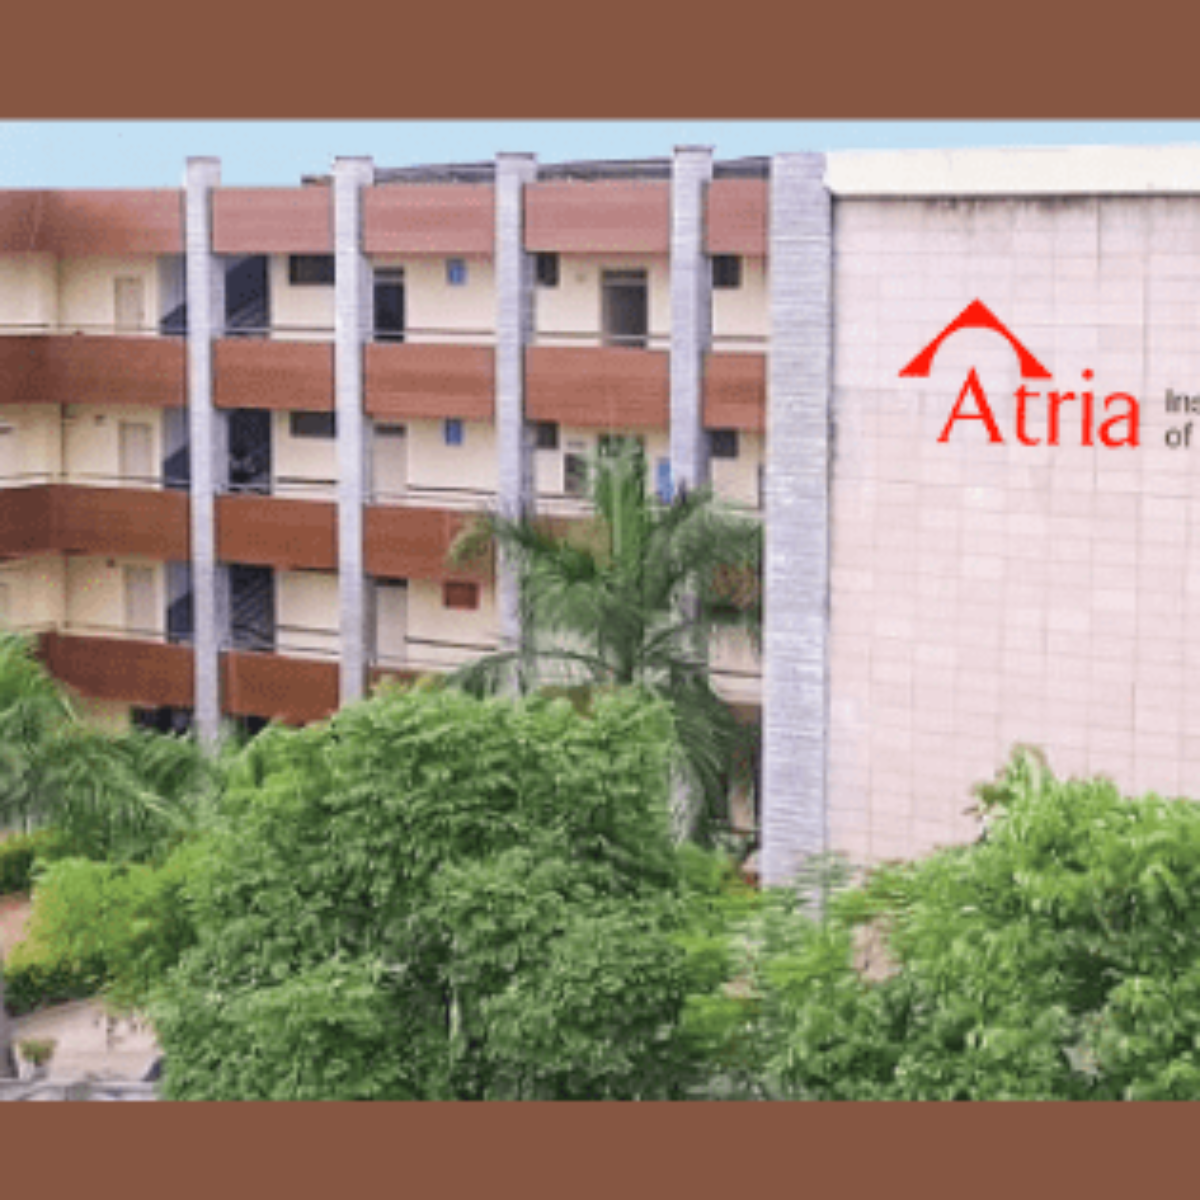 Atria Institute Of Technology (AIT)|COMEDK, KCET|full  review|Placement,fees,hostel,campus,etc. - YouTube